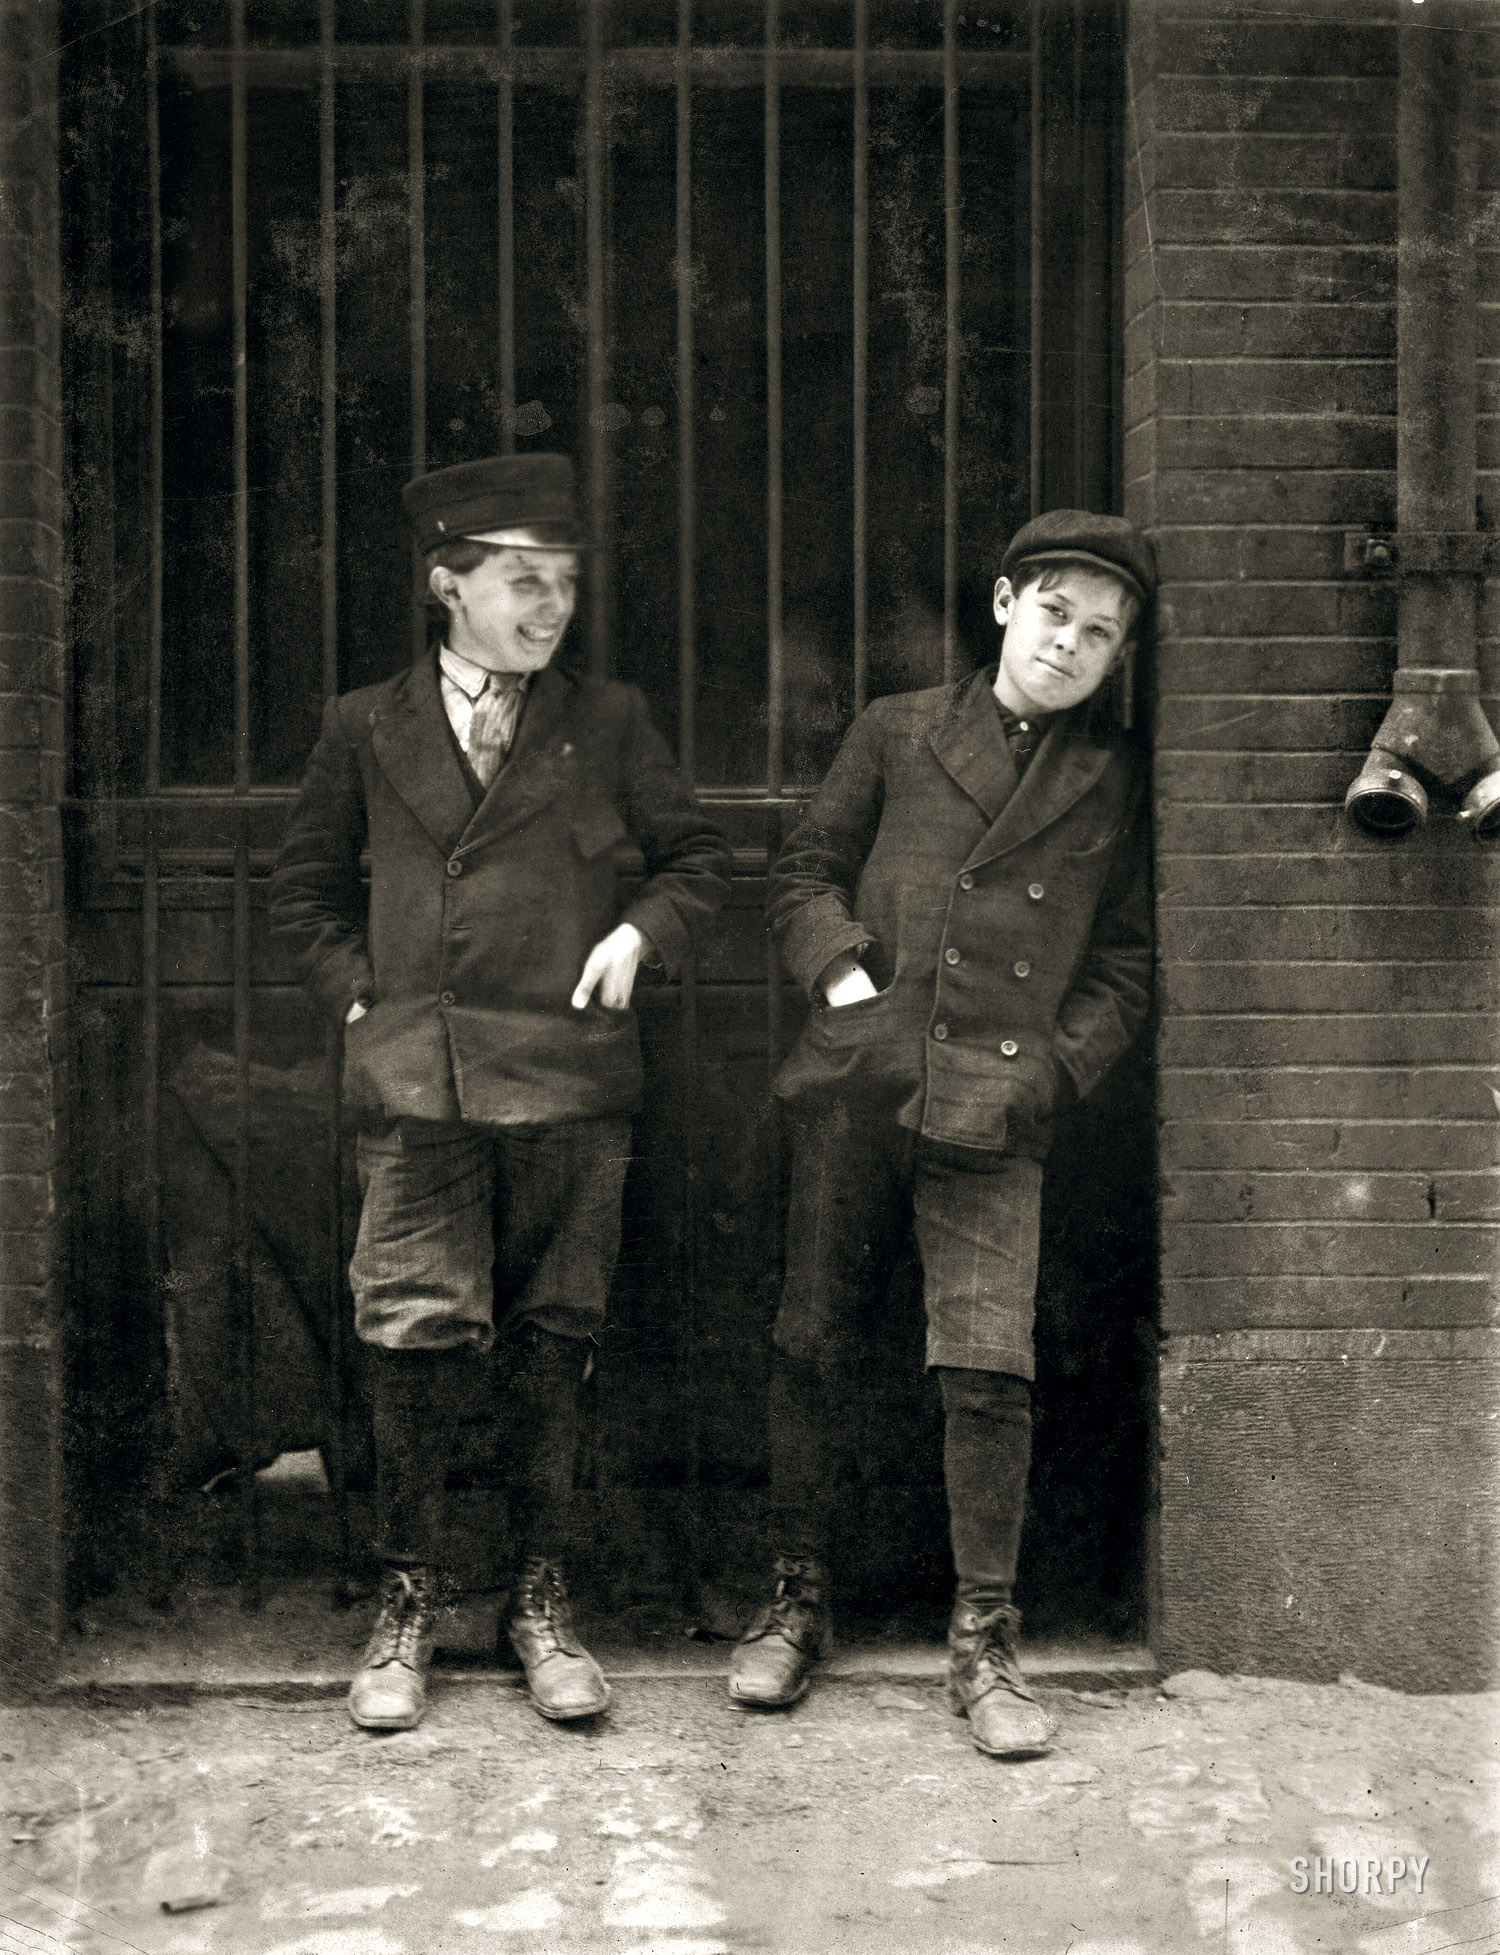 May 1910. St. Louis, Mo. "Two boys working in Inland Type Foundry, 12th & Locust. Work 9 to 10 hours a day. Noon." Photo by Lewis Hine. View full size.